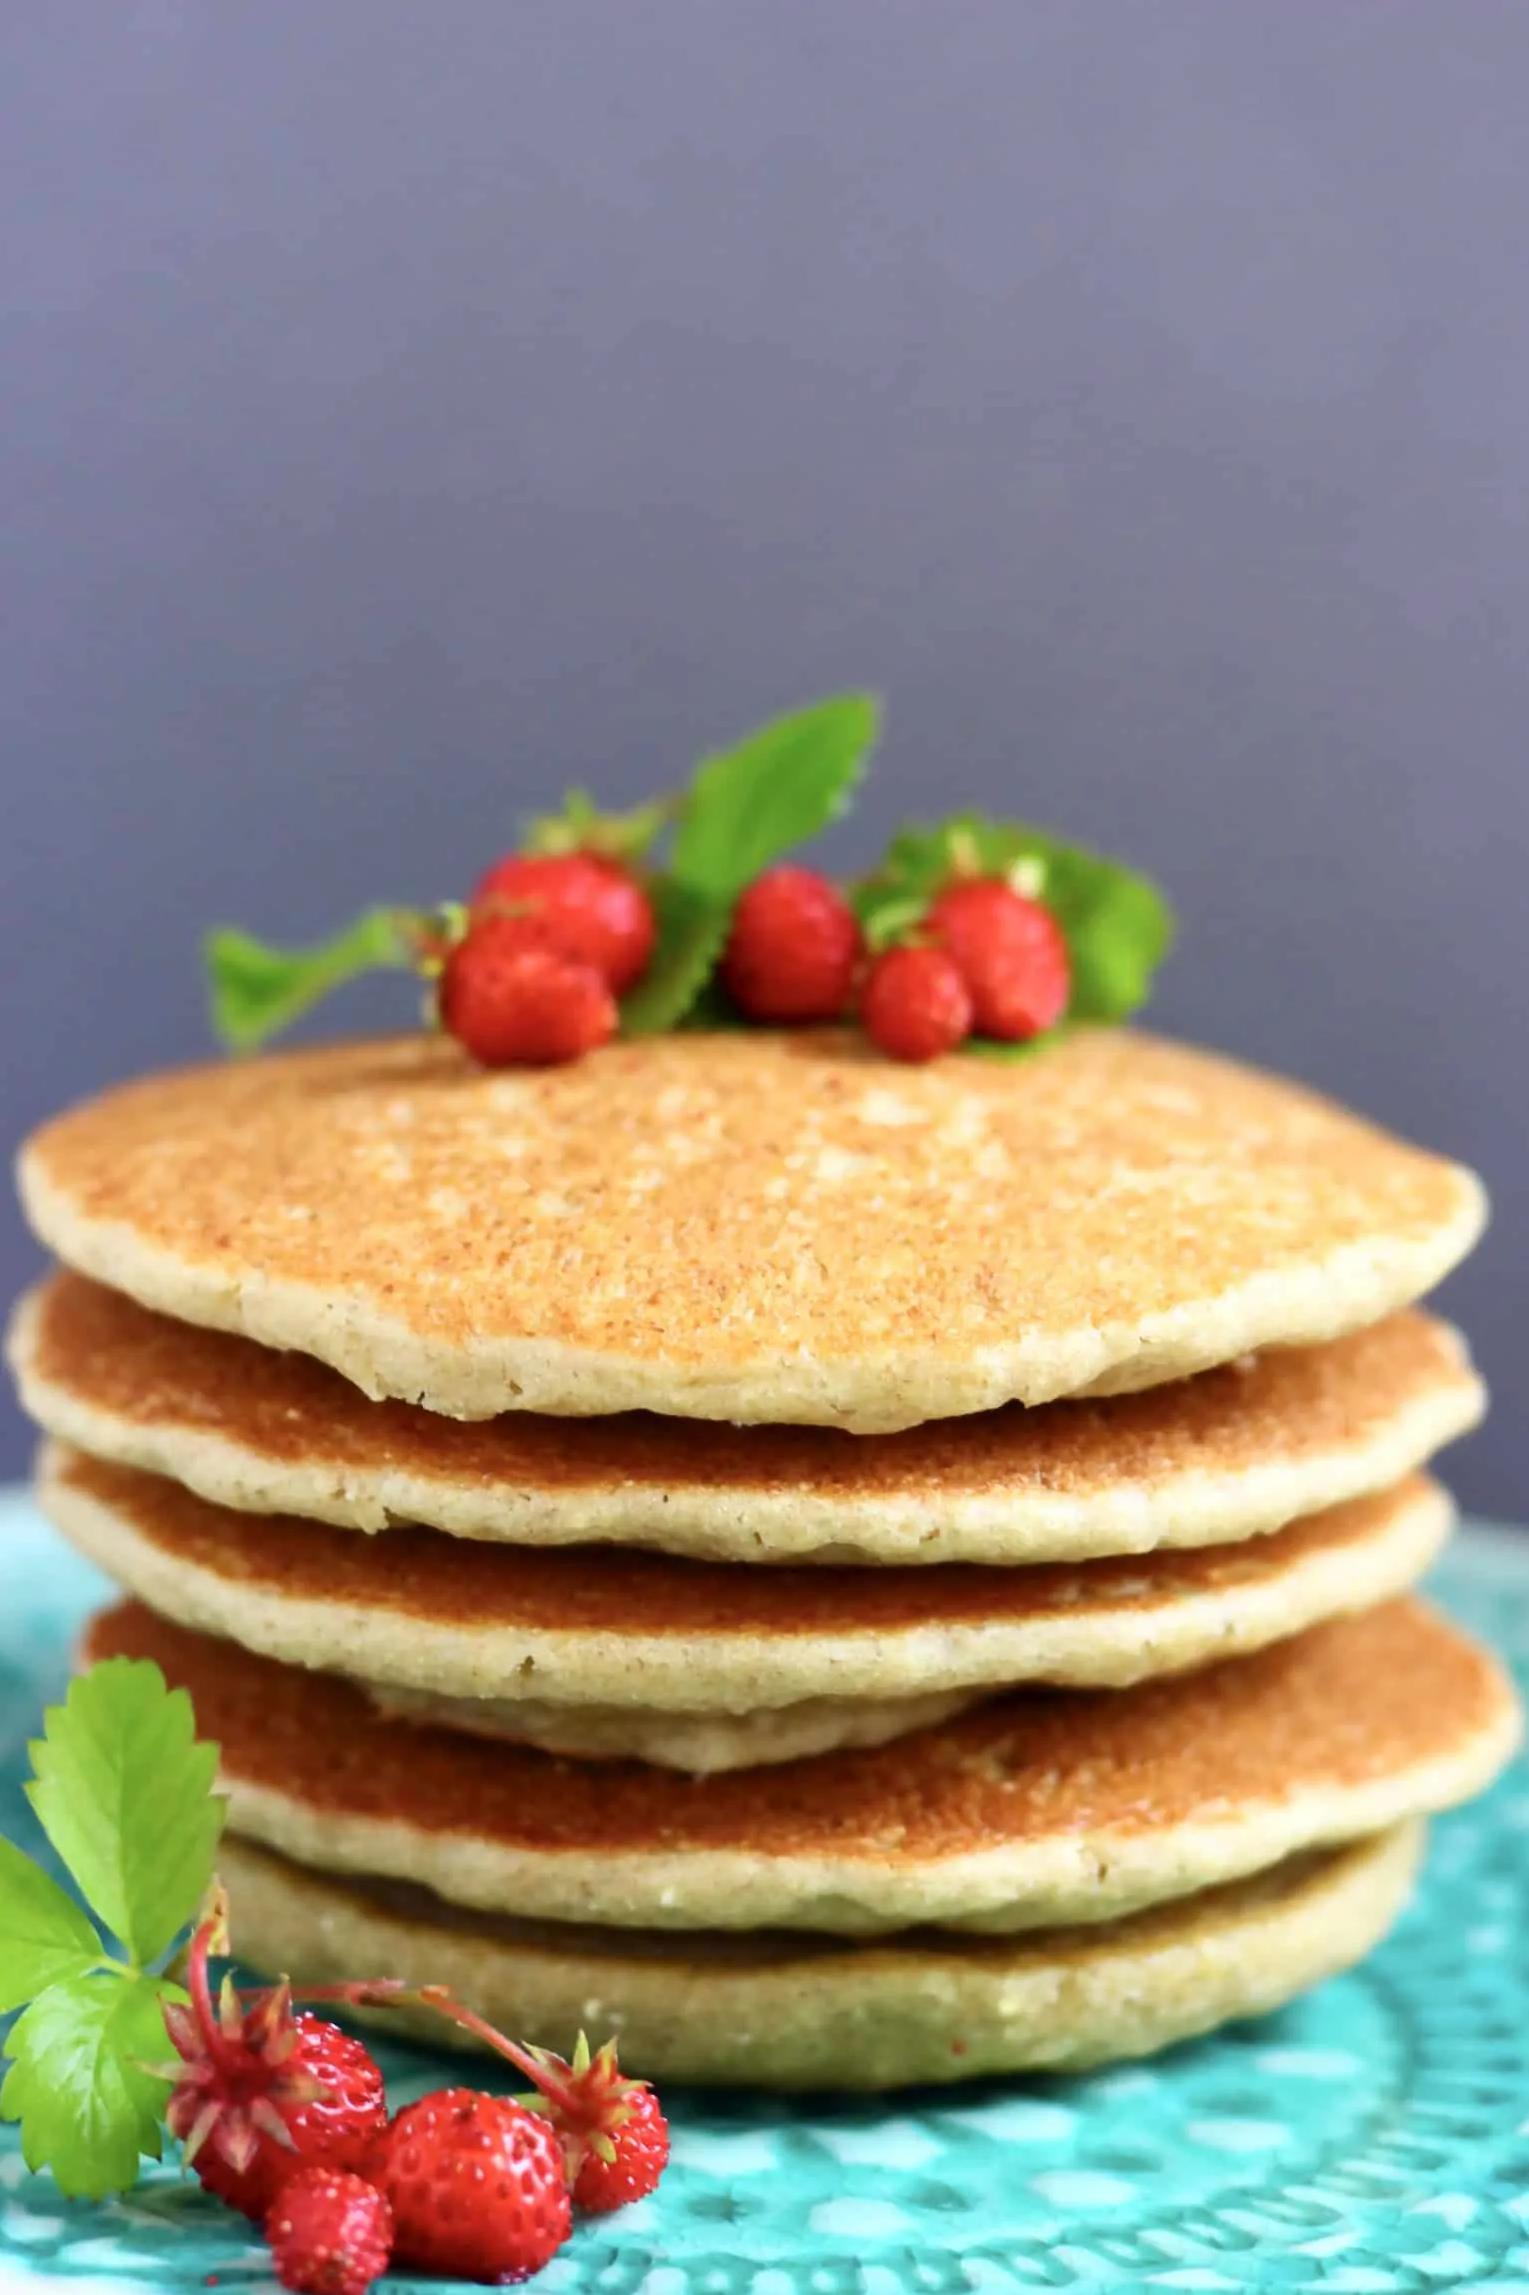  Your taste buds will thank you for trying these gluten-free and dairy-free quinoa pancakes.